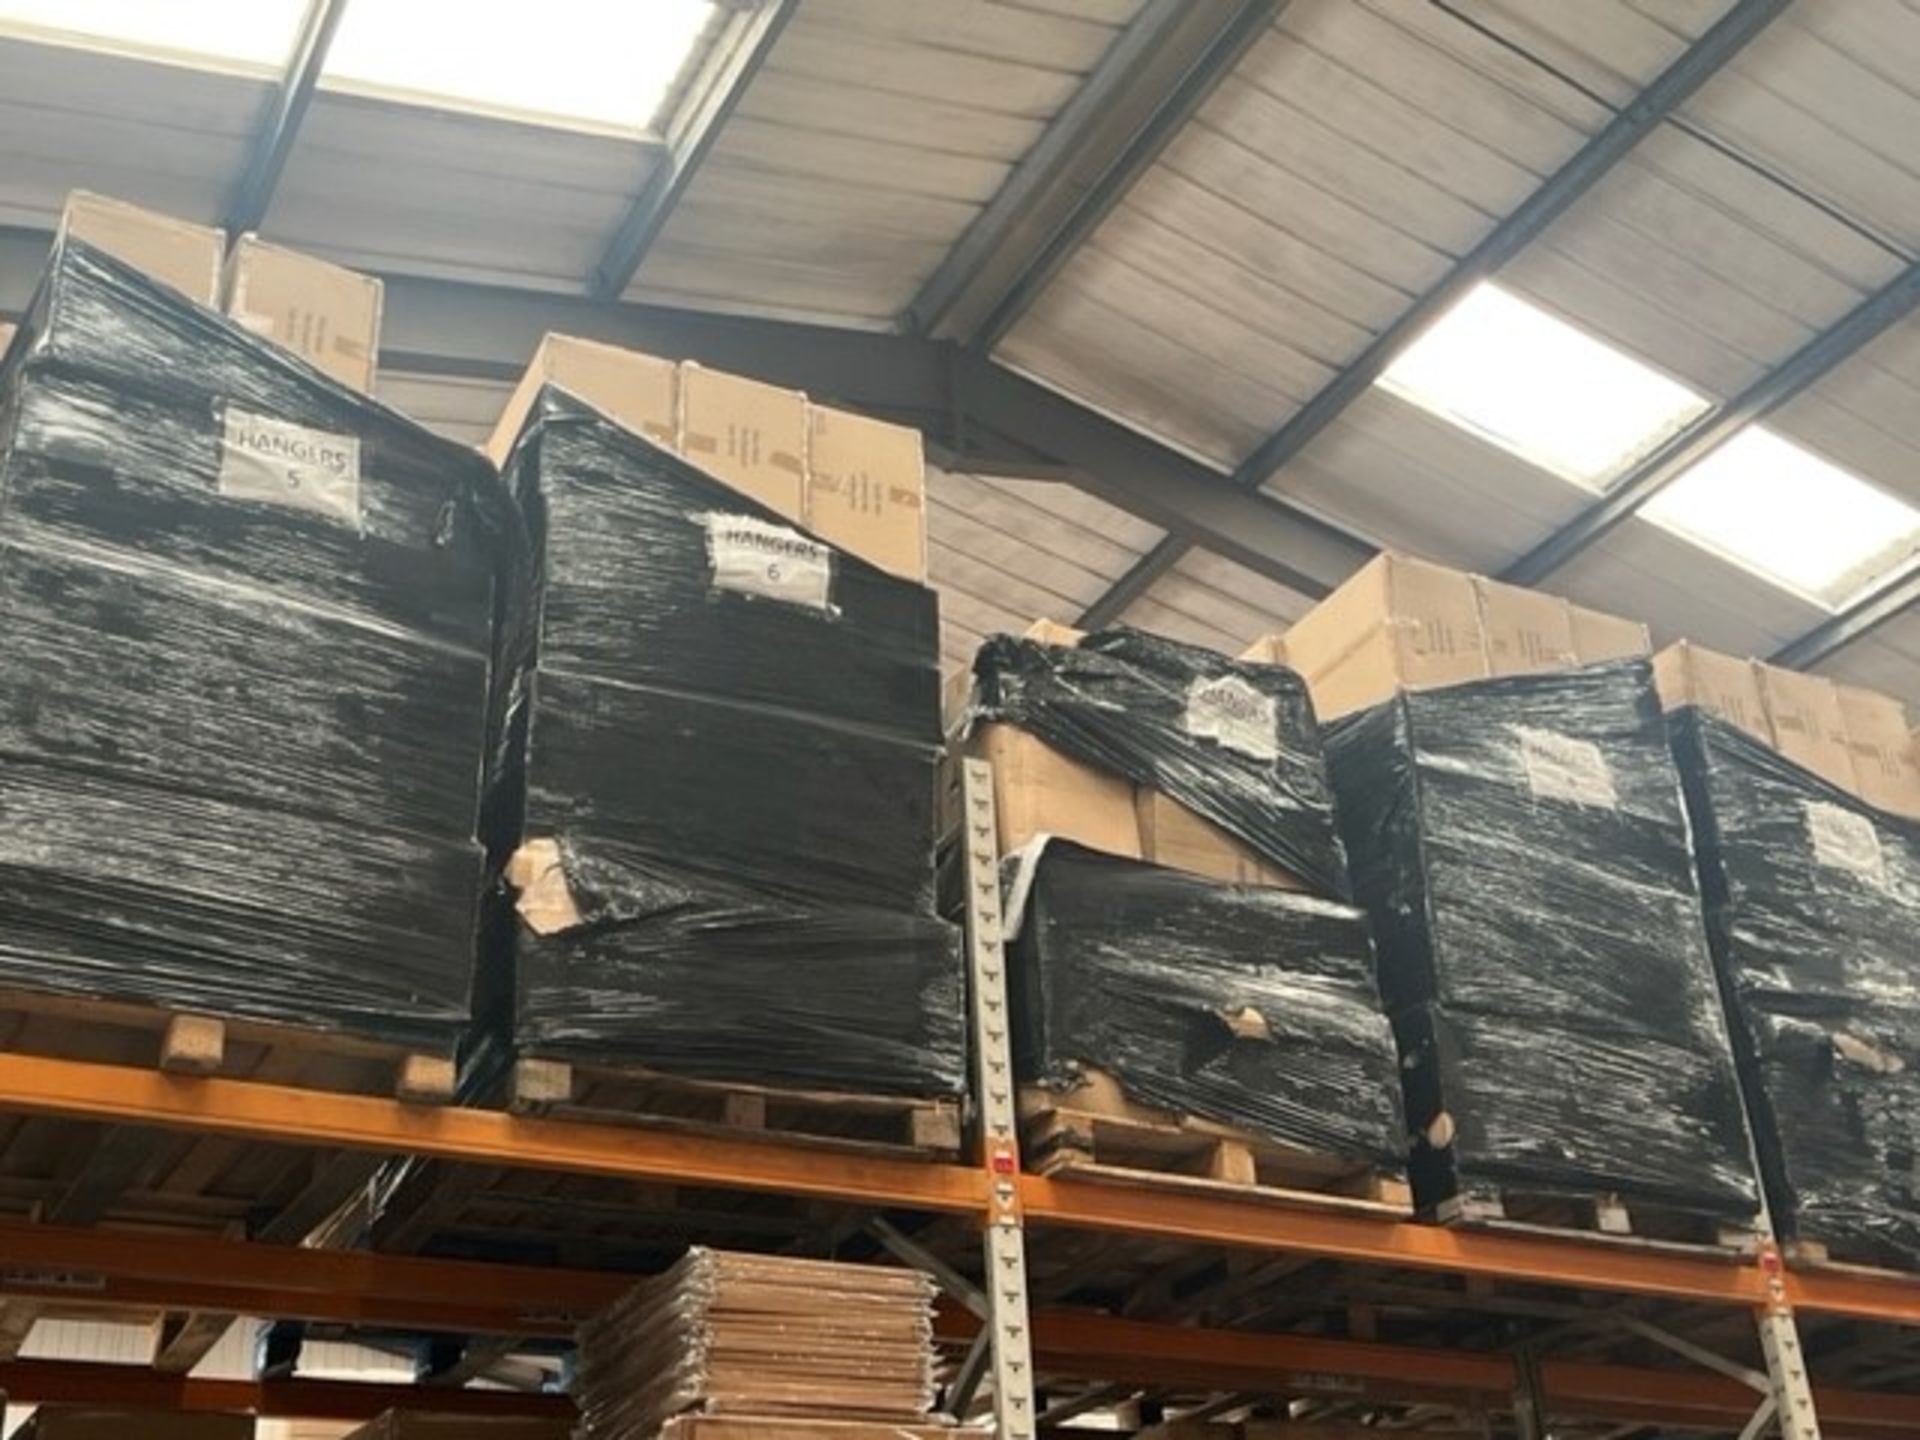 1 PALLET OF 1400 X WOODEN SECURITY COATHANGERS LIGHT WOOD WITH METAL BAR & SKIRT CLIPS - Image 4 of 4